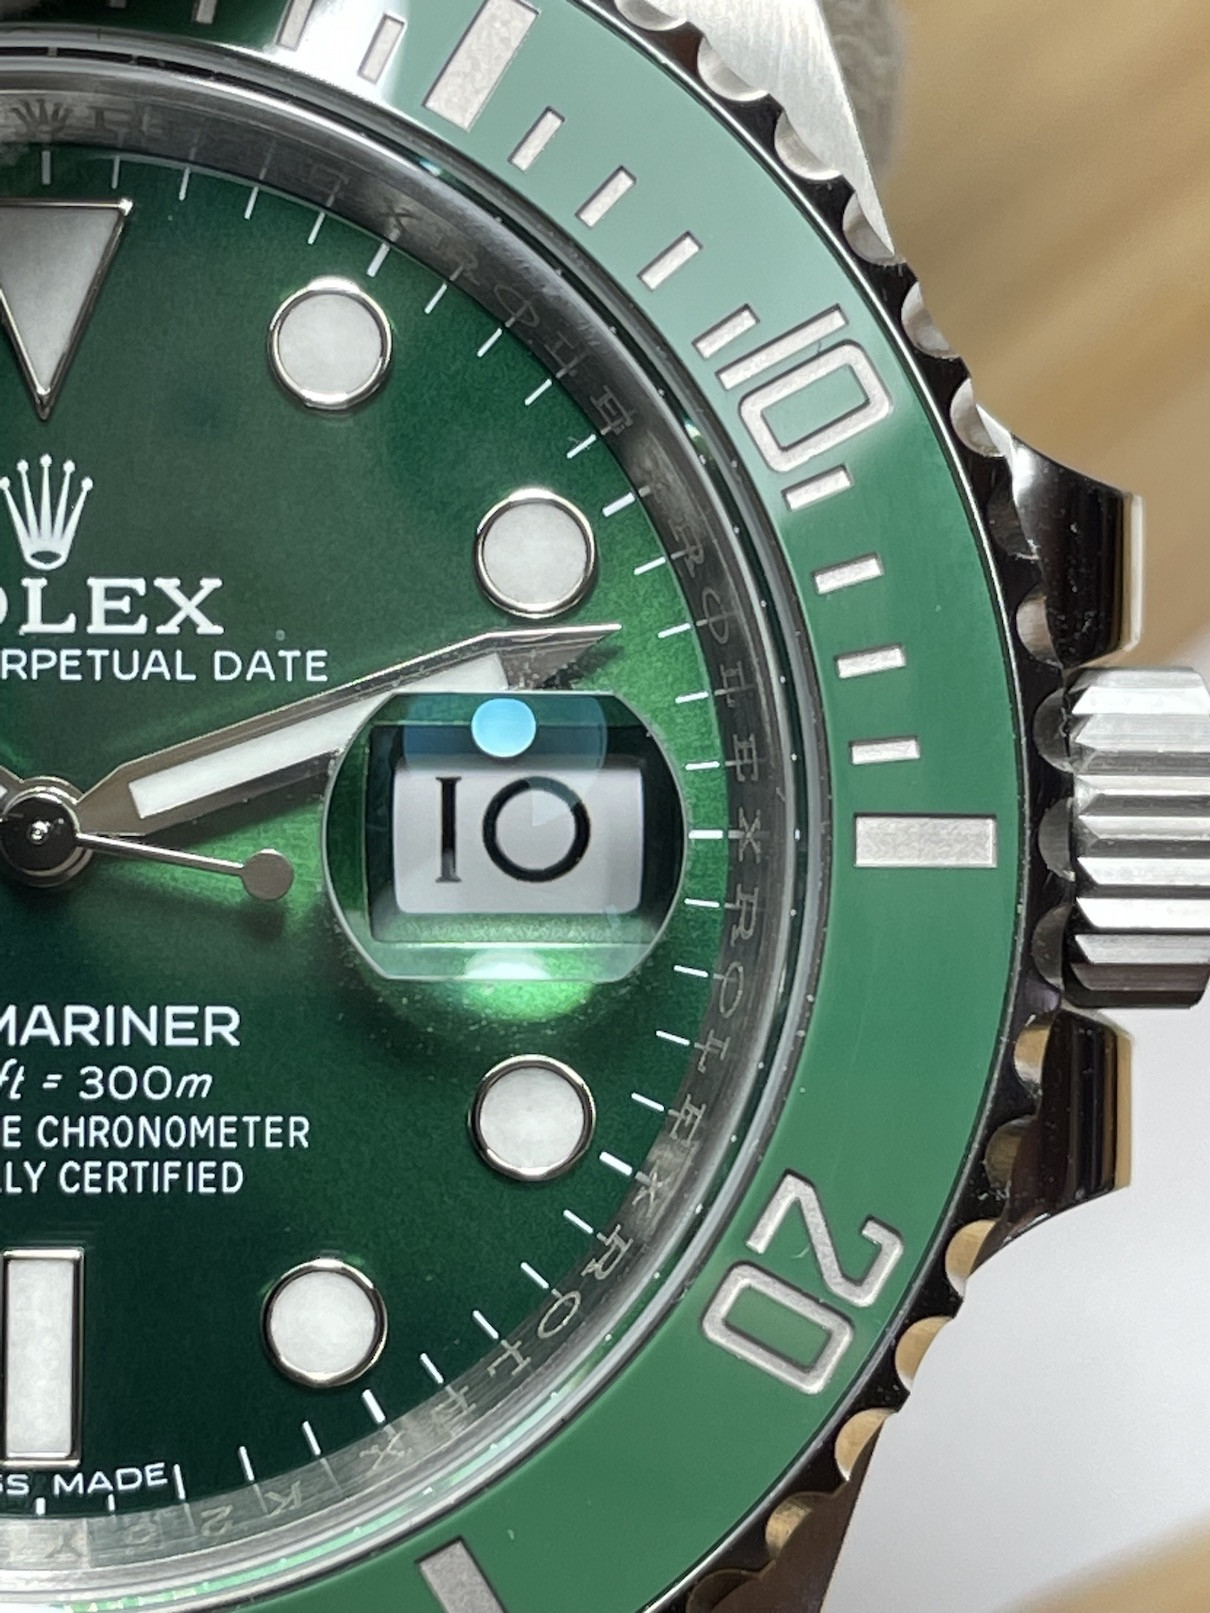 Rolex Submariner Black (11610LN) Vs Rolex Submariner Green Hulk (116610LV)  - Which would you choose? 